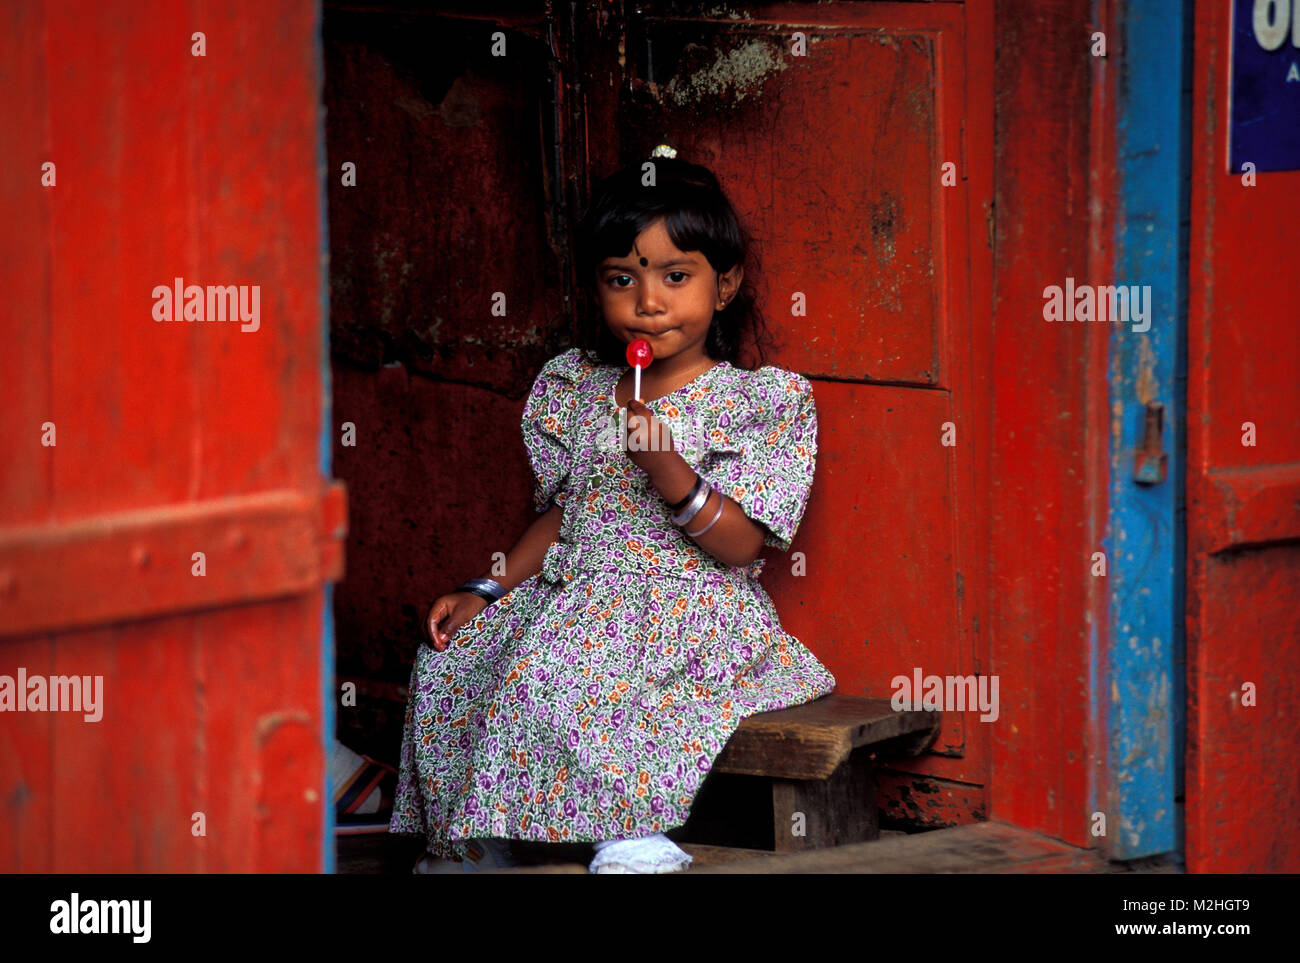 Young girl in MAURITIUS Stock Photo